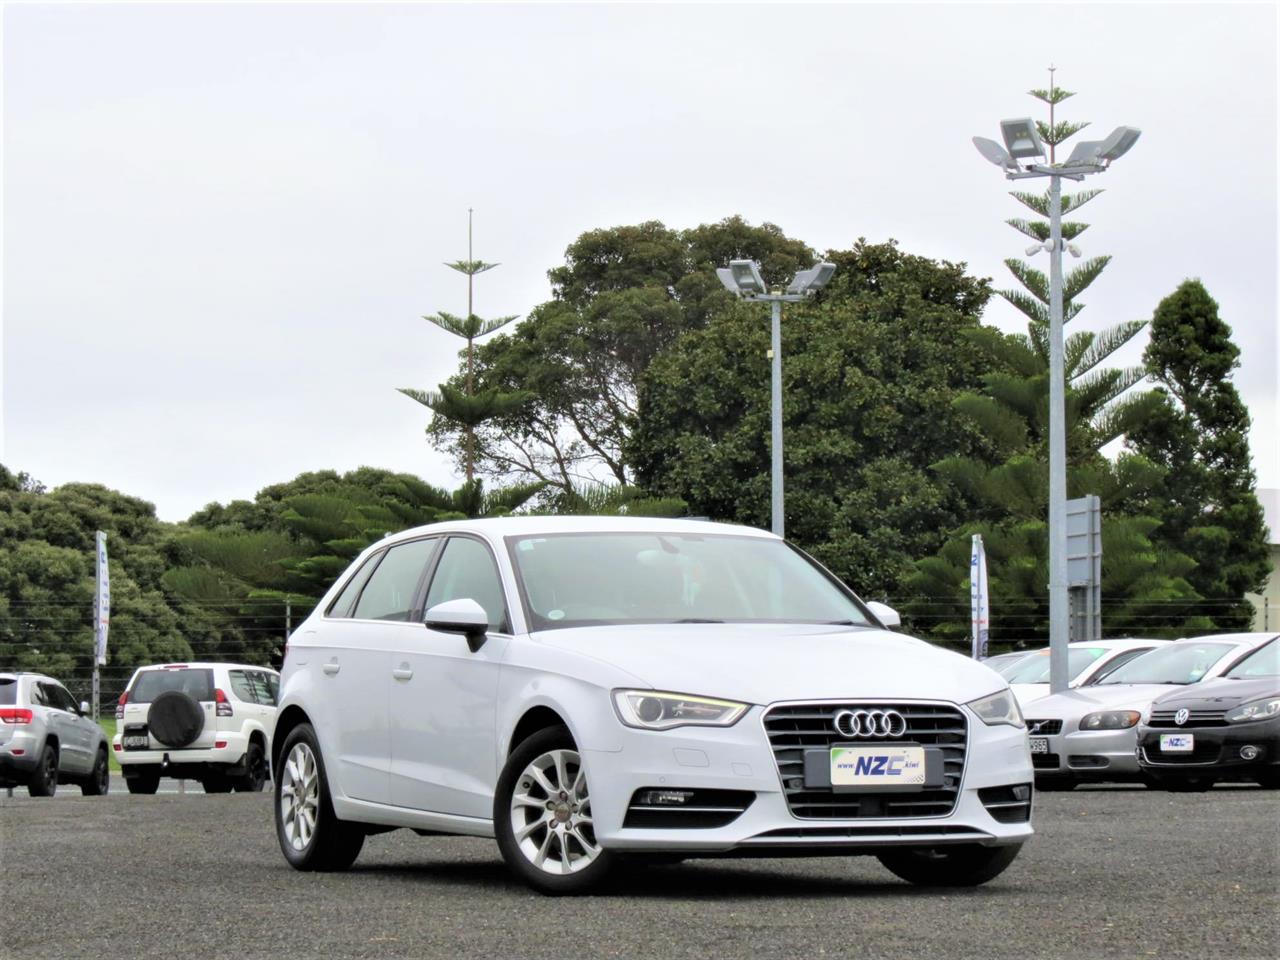 NZC 2014 Audi A3 just arrived to Auckland